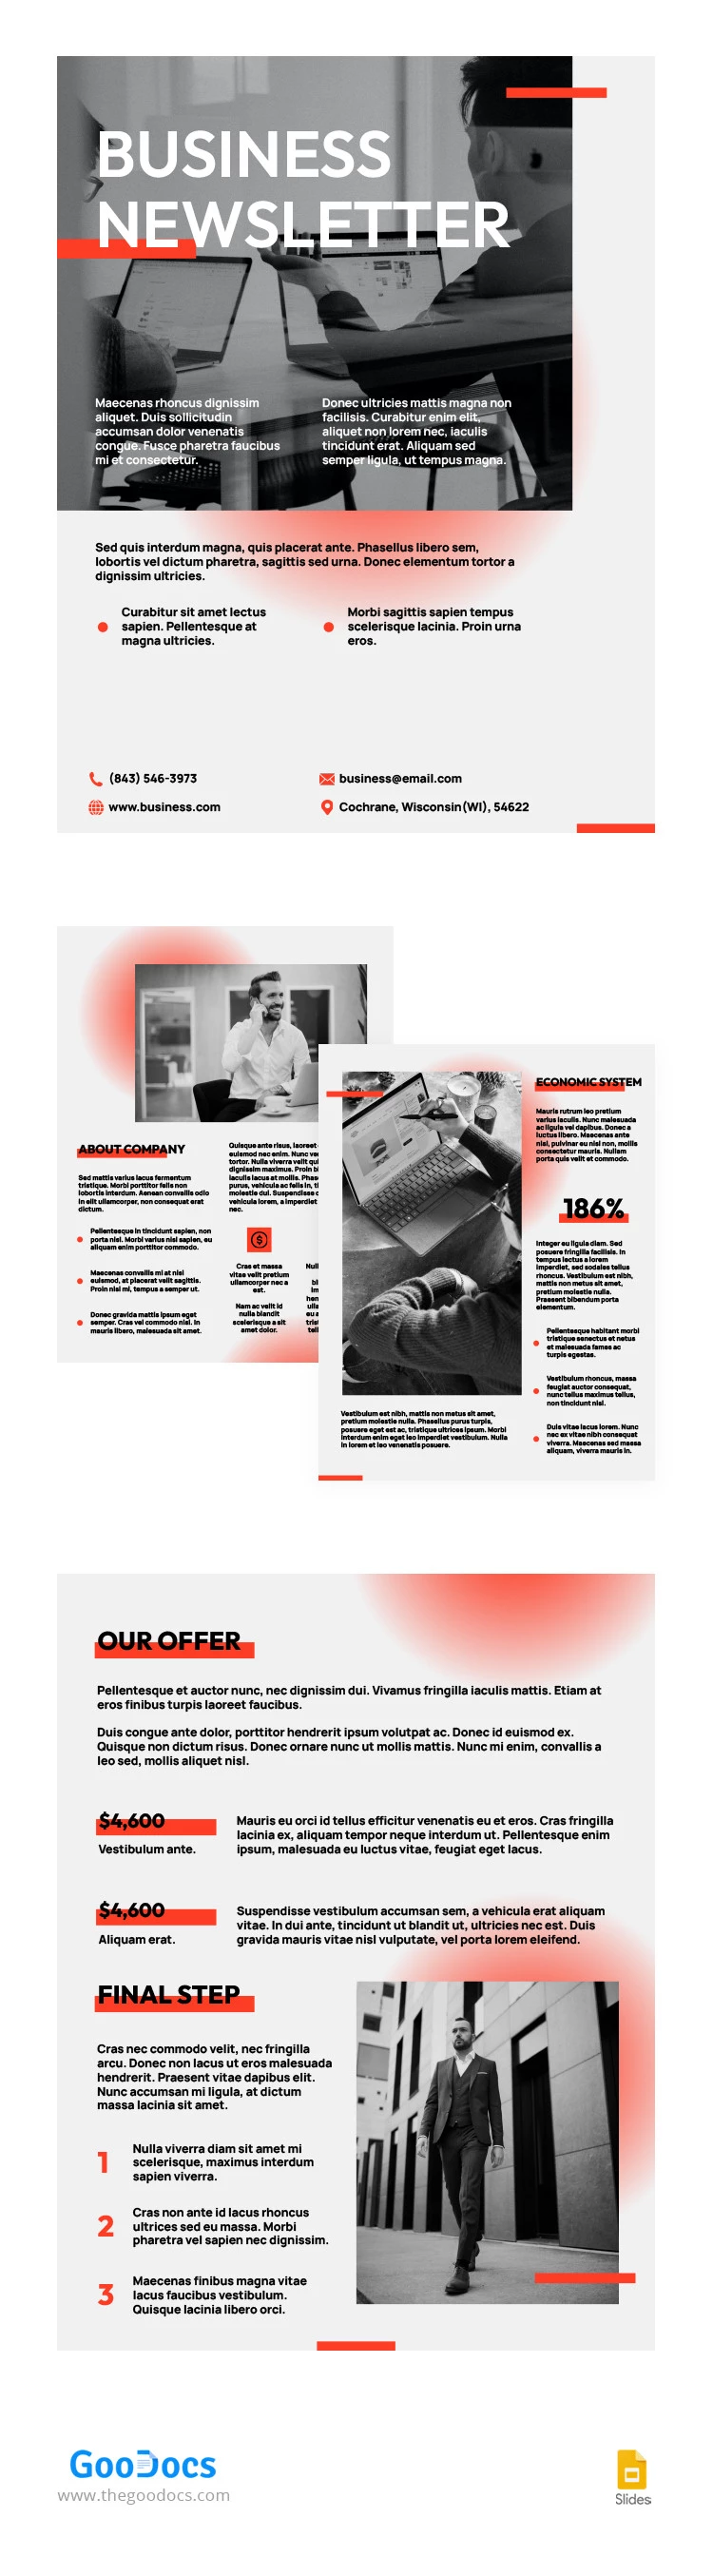 Business Newsletter with Red Gradient - free Google Docs Template - 10065326